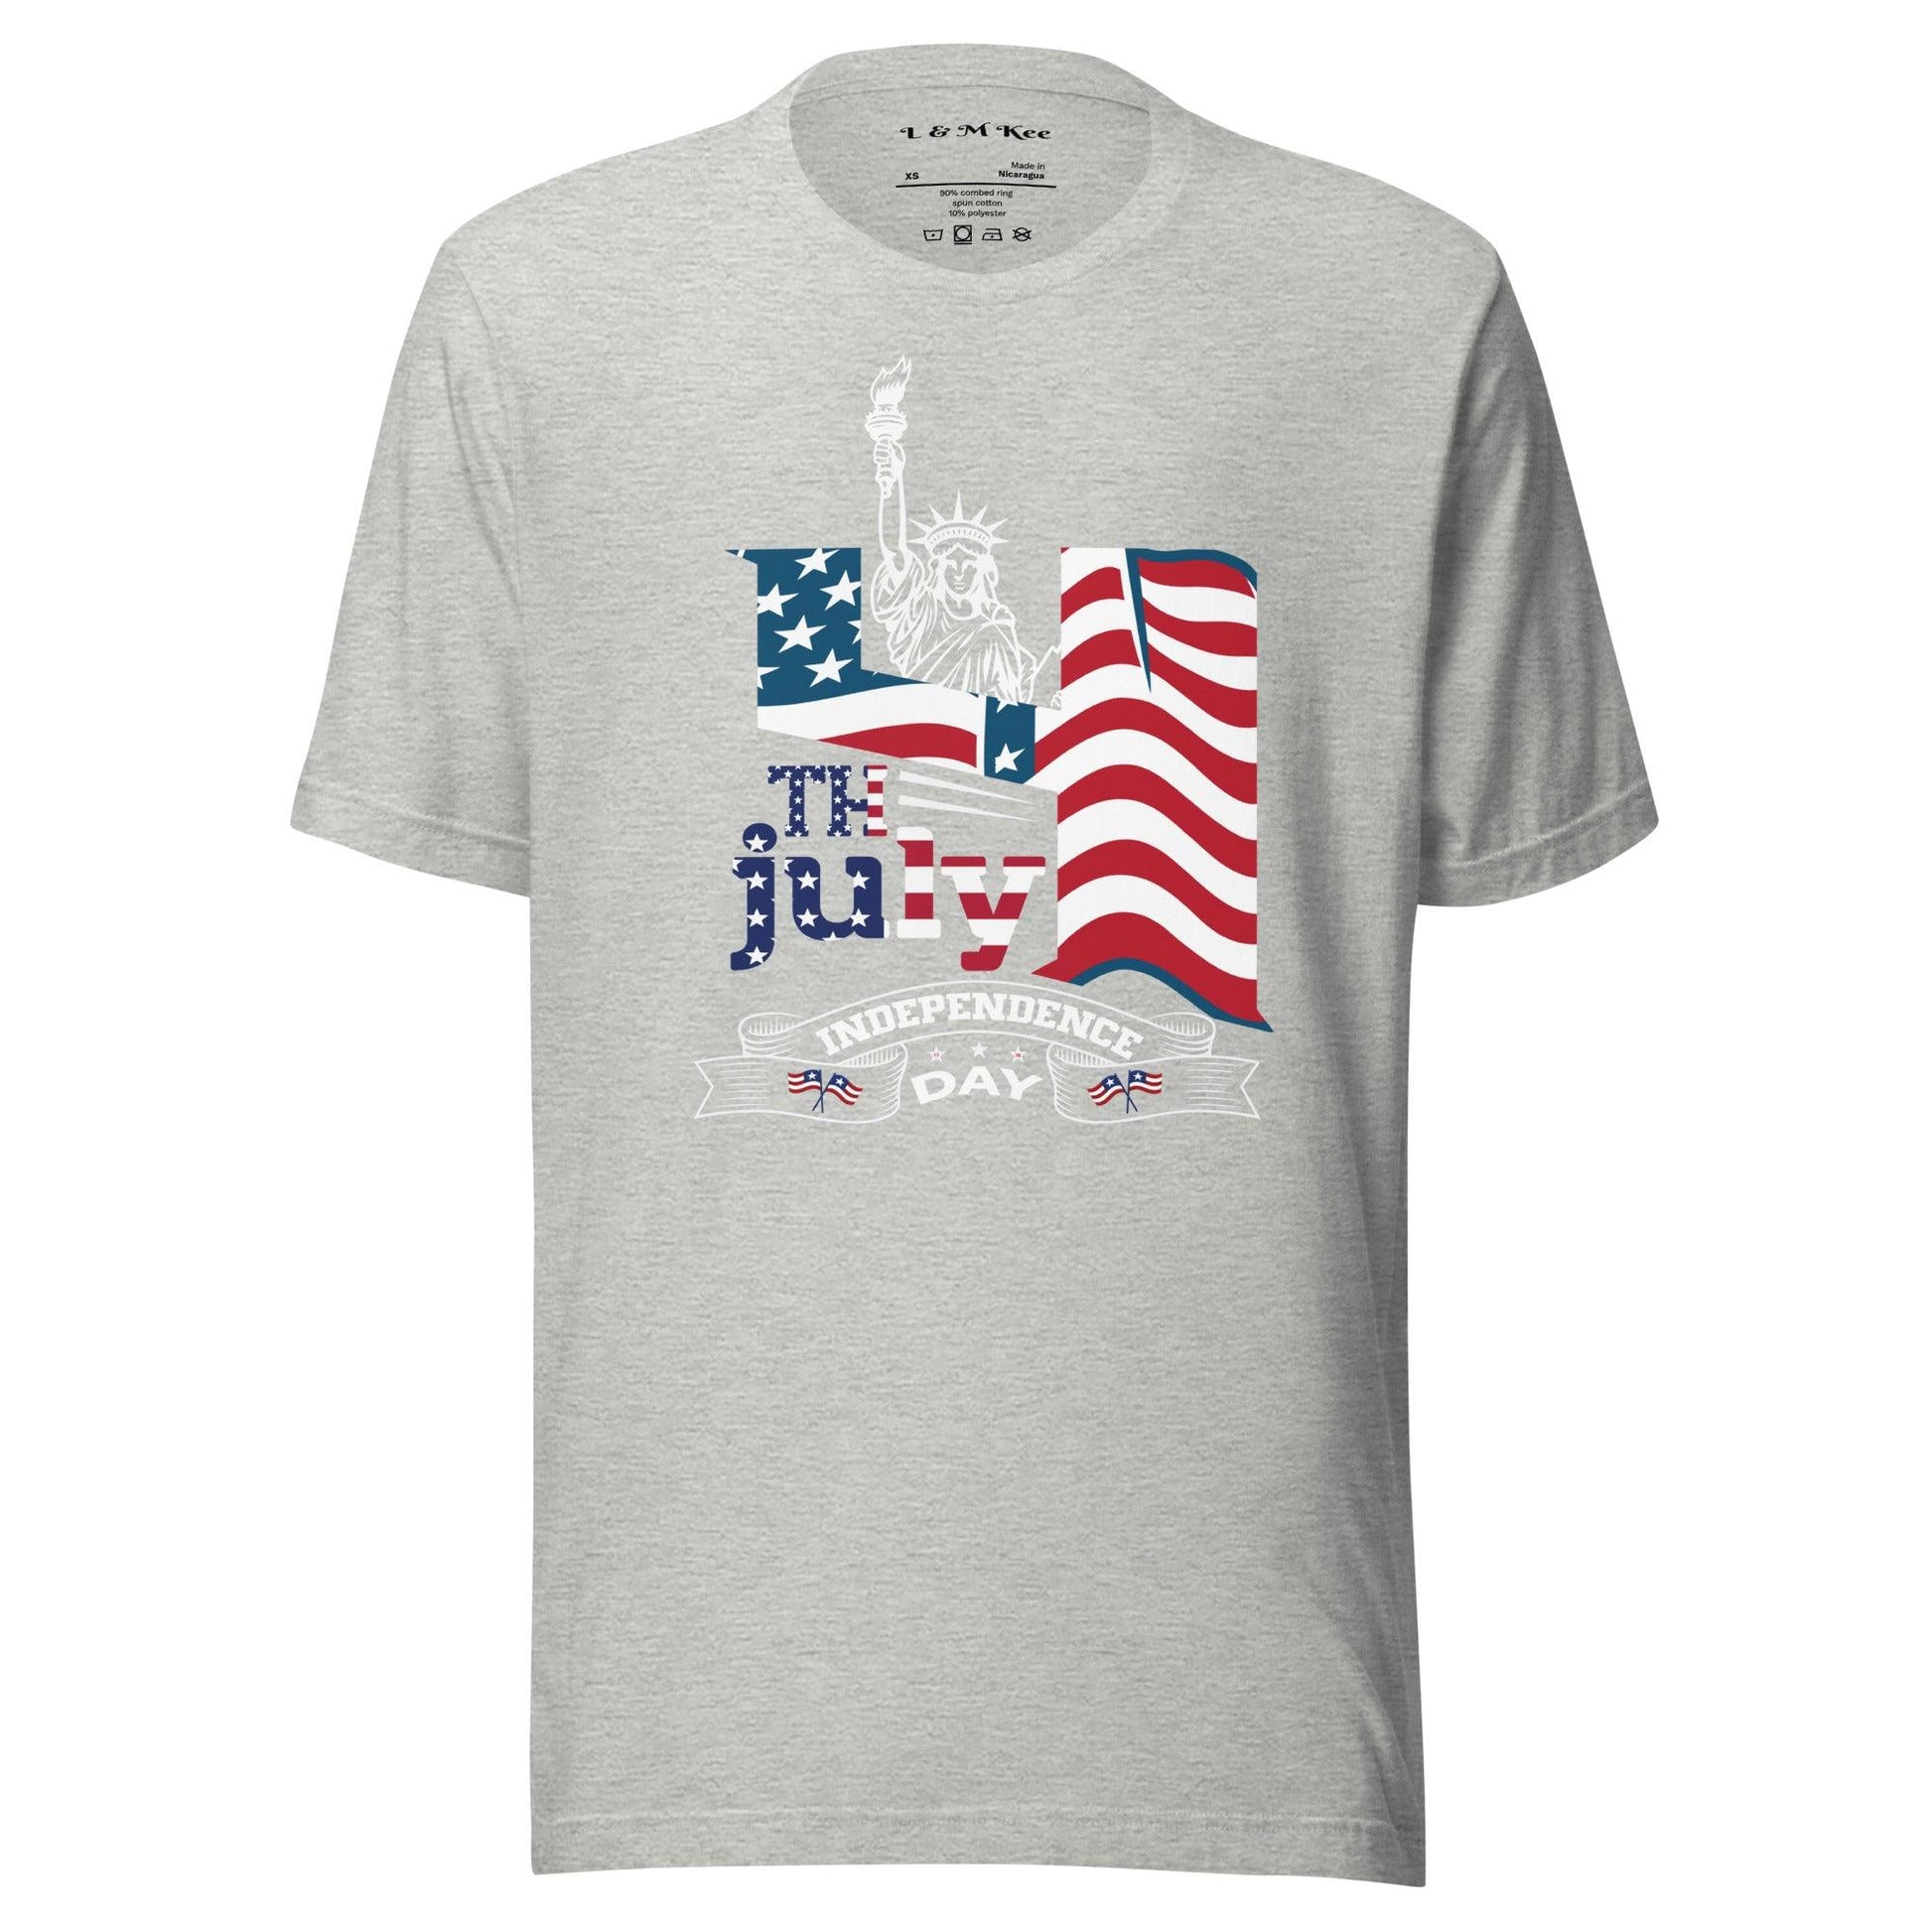 4th of July Independence Day T-shirt - L & M Kee, LLC